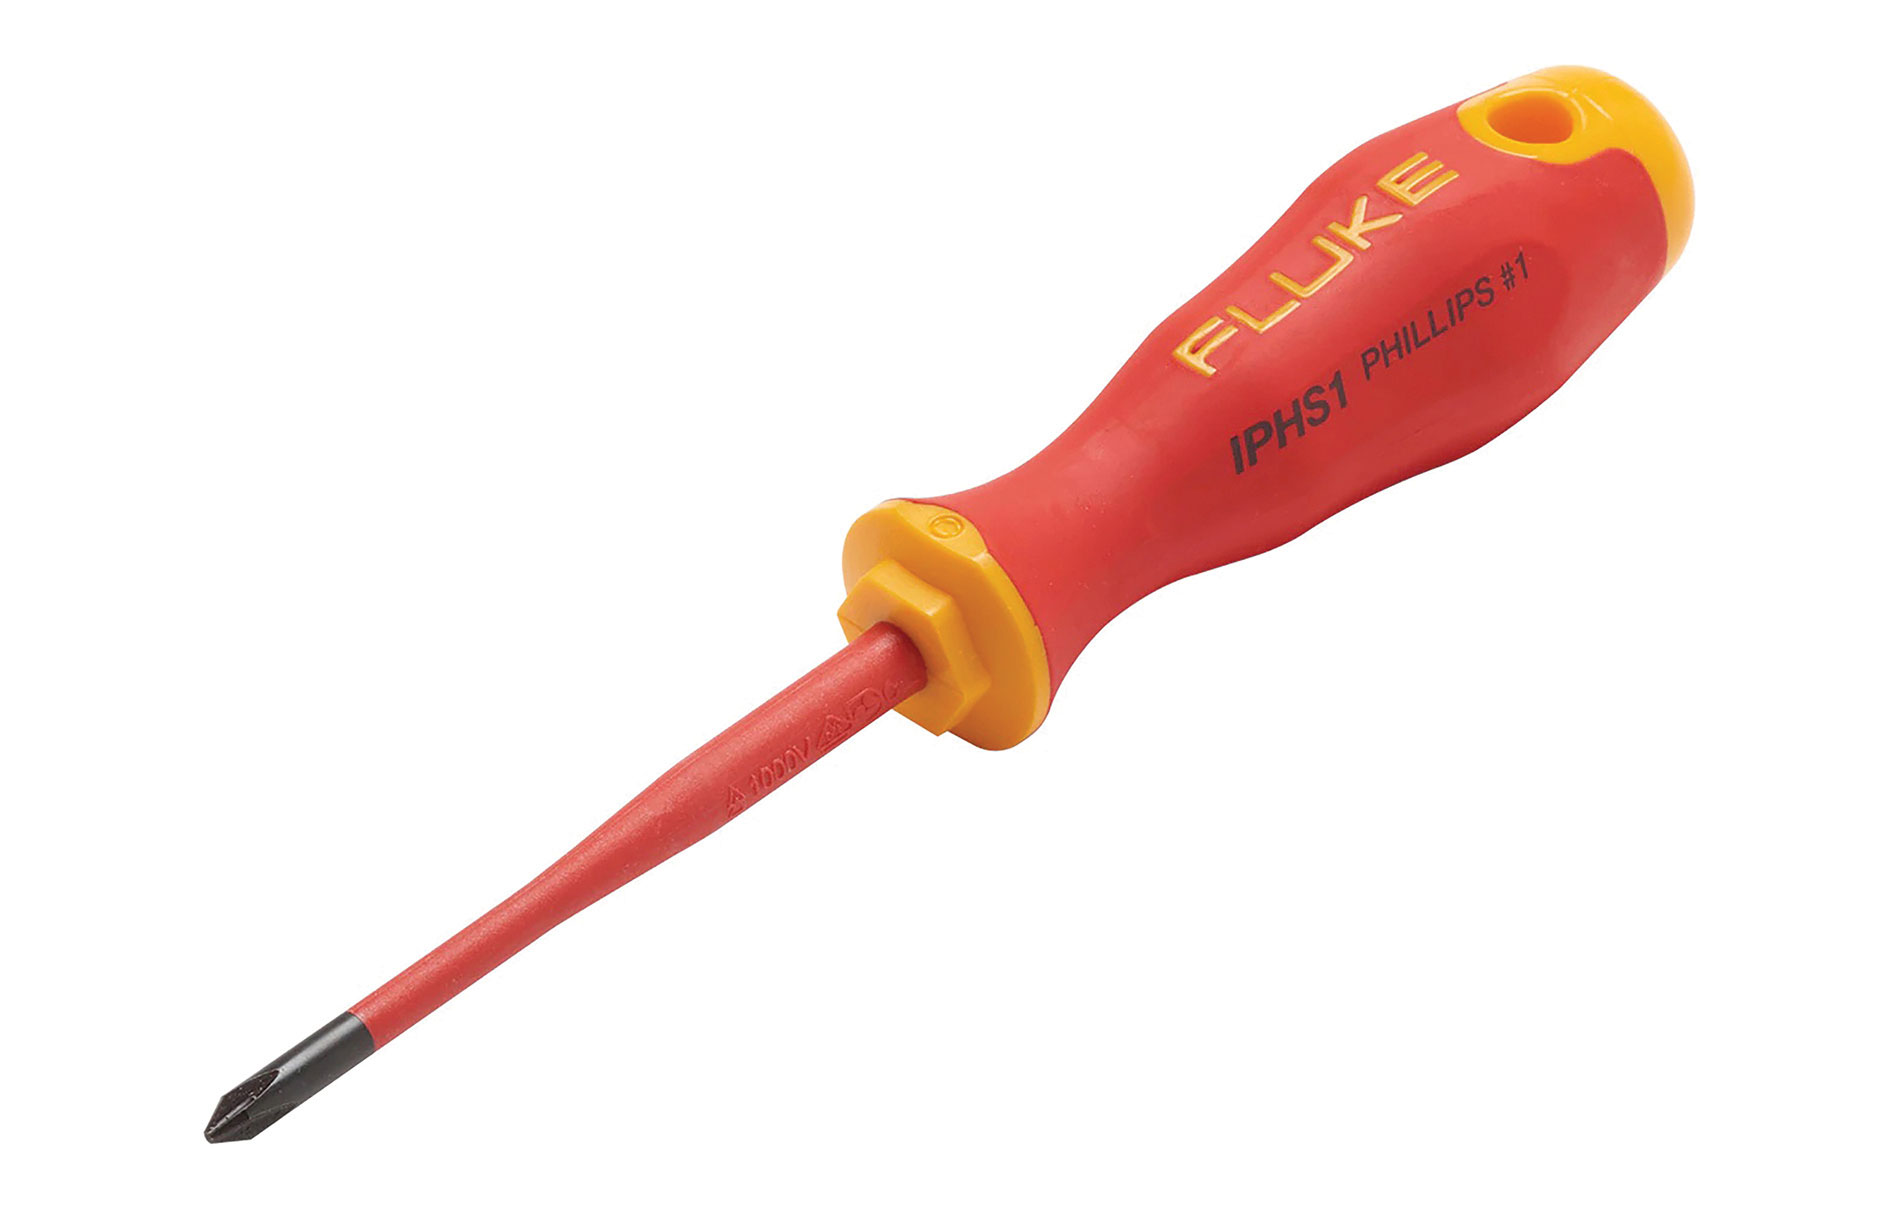 Red, black, and yellow Phillips-head screwdriver. Image by Fluke.